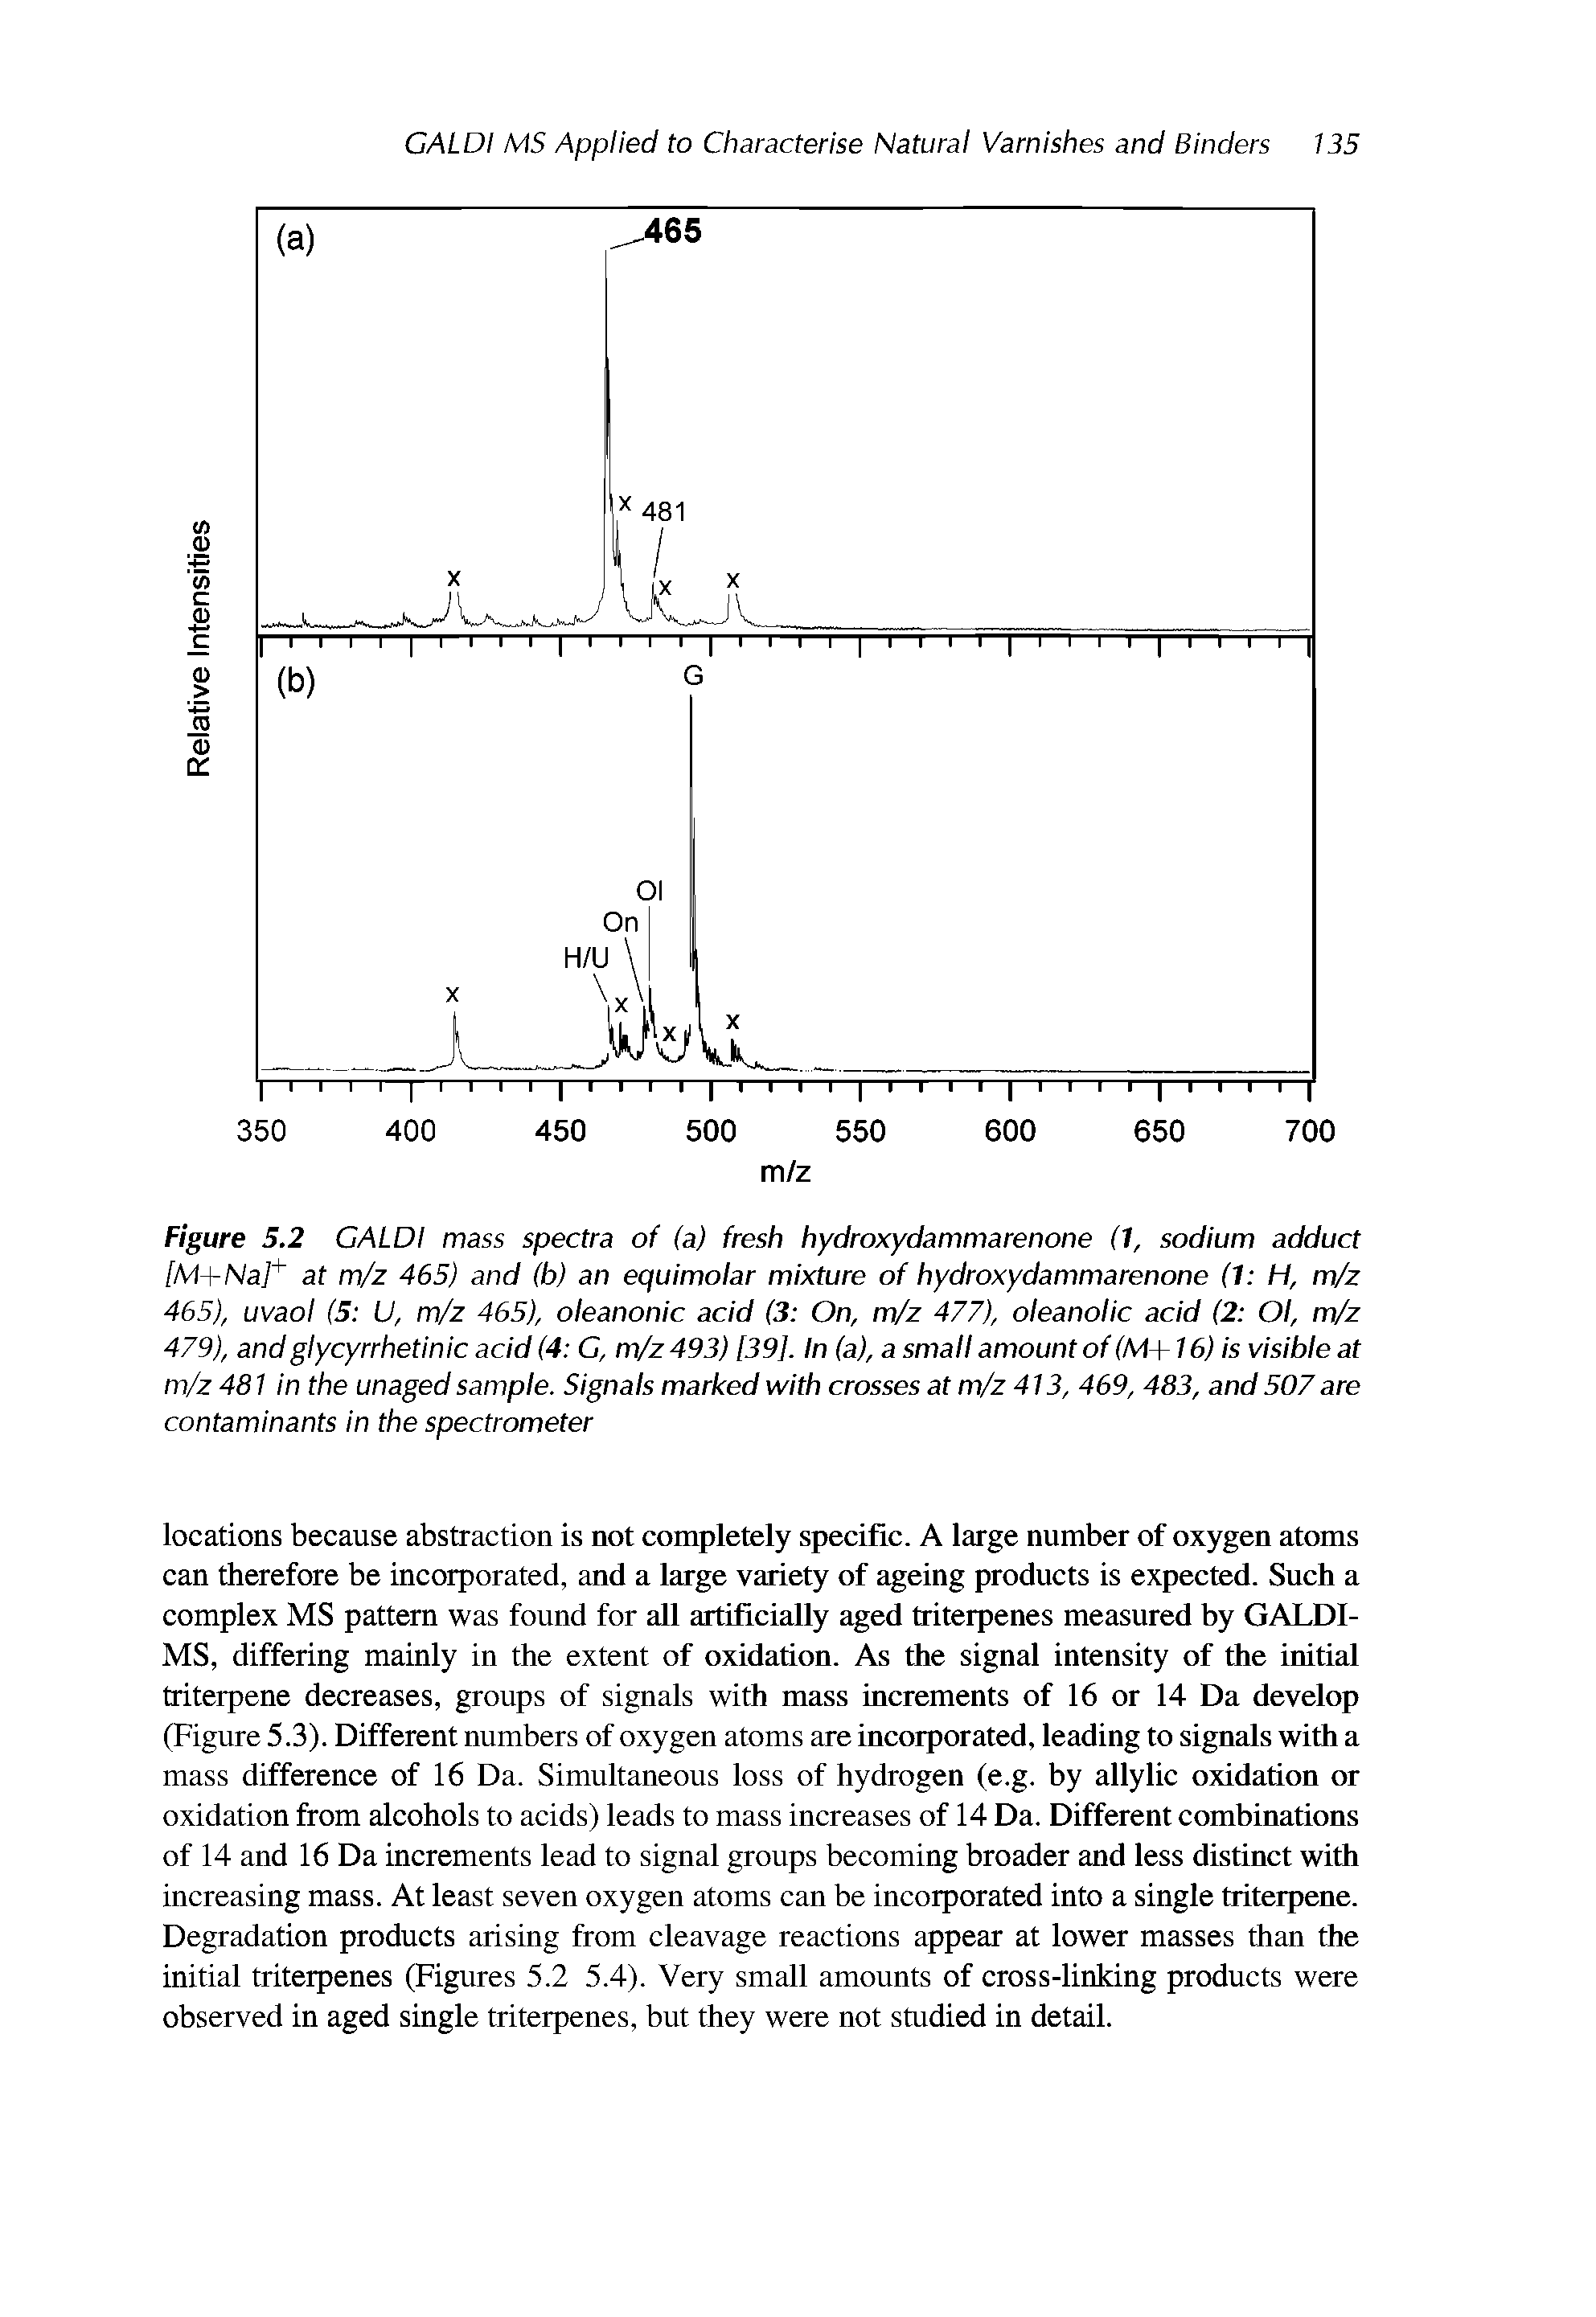 Figure 5.2 GALDI mass spectra of (a) fresh hydroxydammarenone (1, sodium adduct [M+Na]+ at m/z 465) and (b) an equimolar mixture of hydroxydammarenone (1 H, m/z 465), uvaol (5 U, m/z 465), oleanonic acid (3 On, m/z 477), oleanolic acid (2 Ol, m/z 479), andglycyrrhetinic acid (4 G, m/z 493) [39]. In (a), a small amount of (M+16) is visible at m/z 481 in the unaged sample. Signals marked with crosses at m/z 413, 469, 483, and 507are contaminants in the spectrometer...